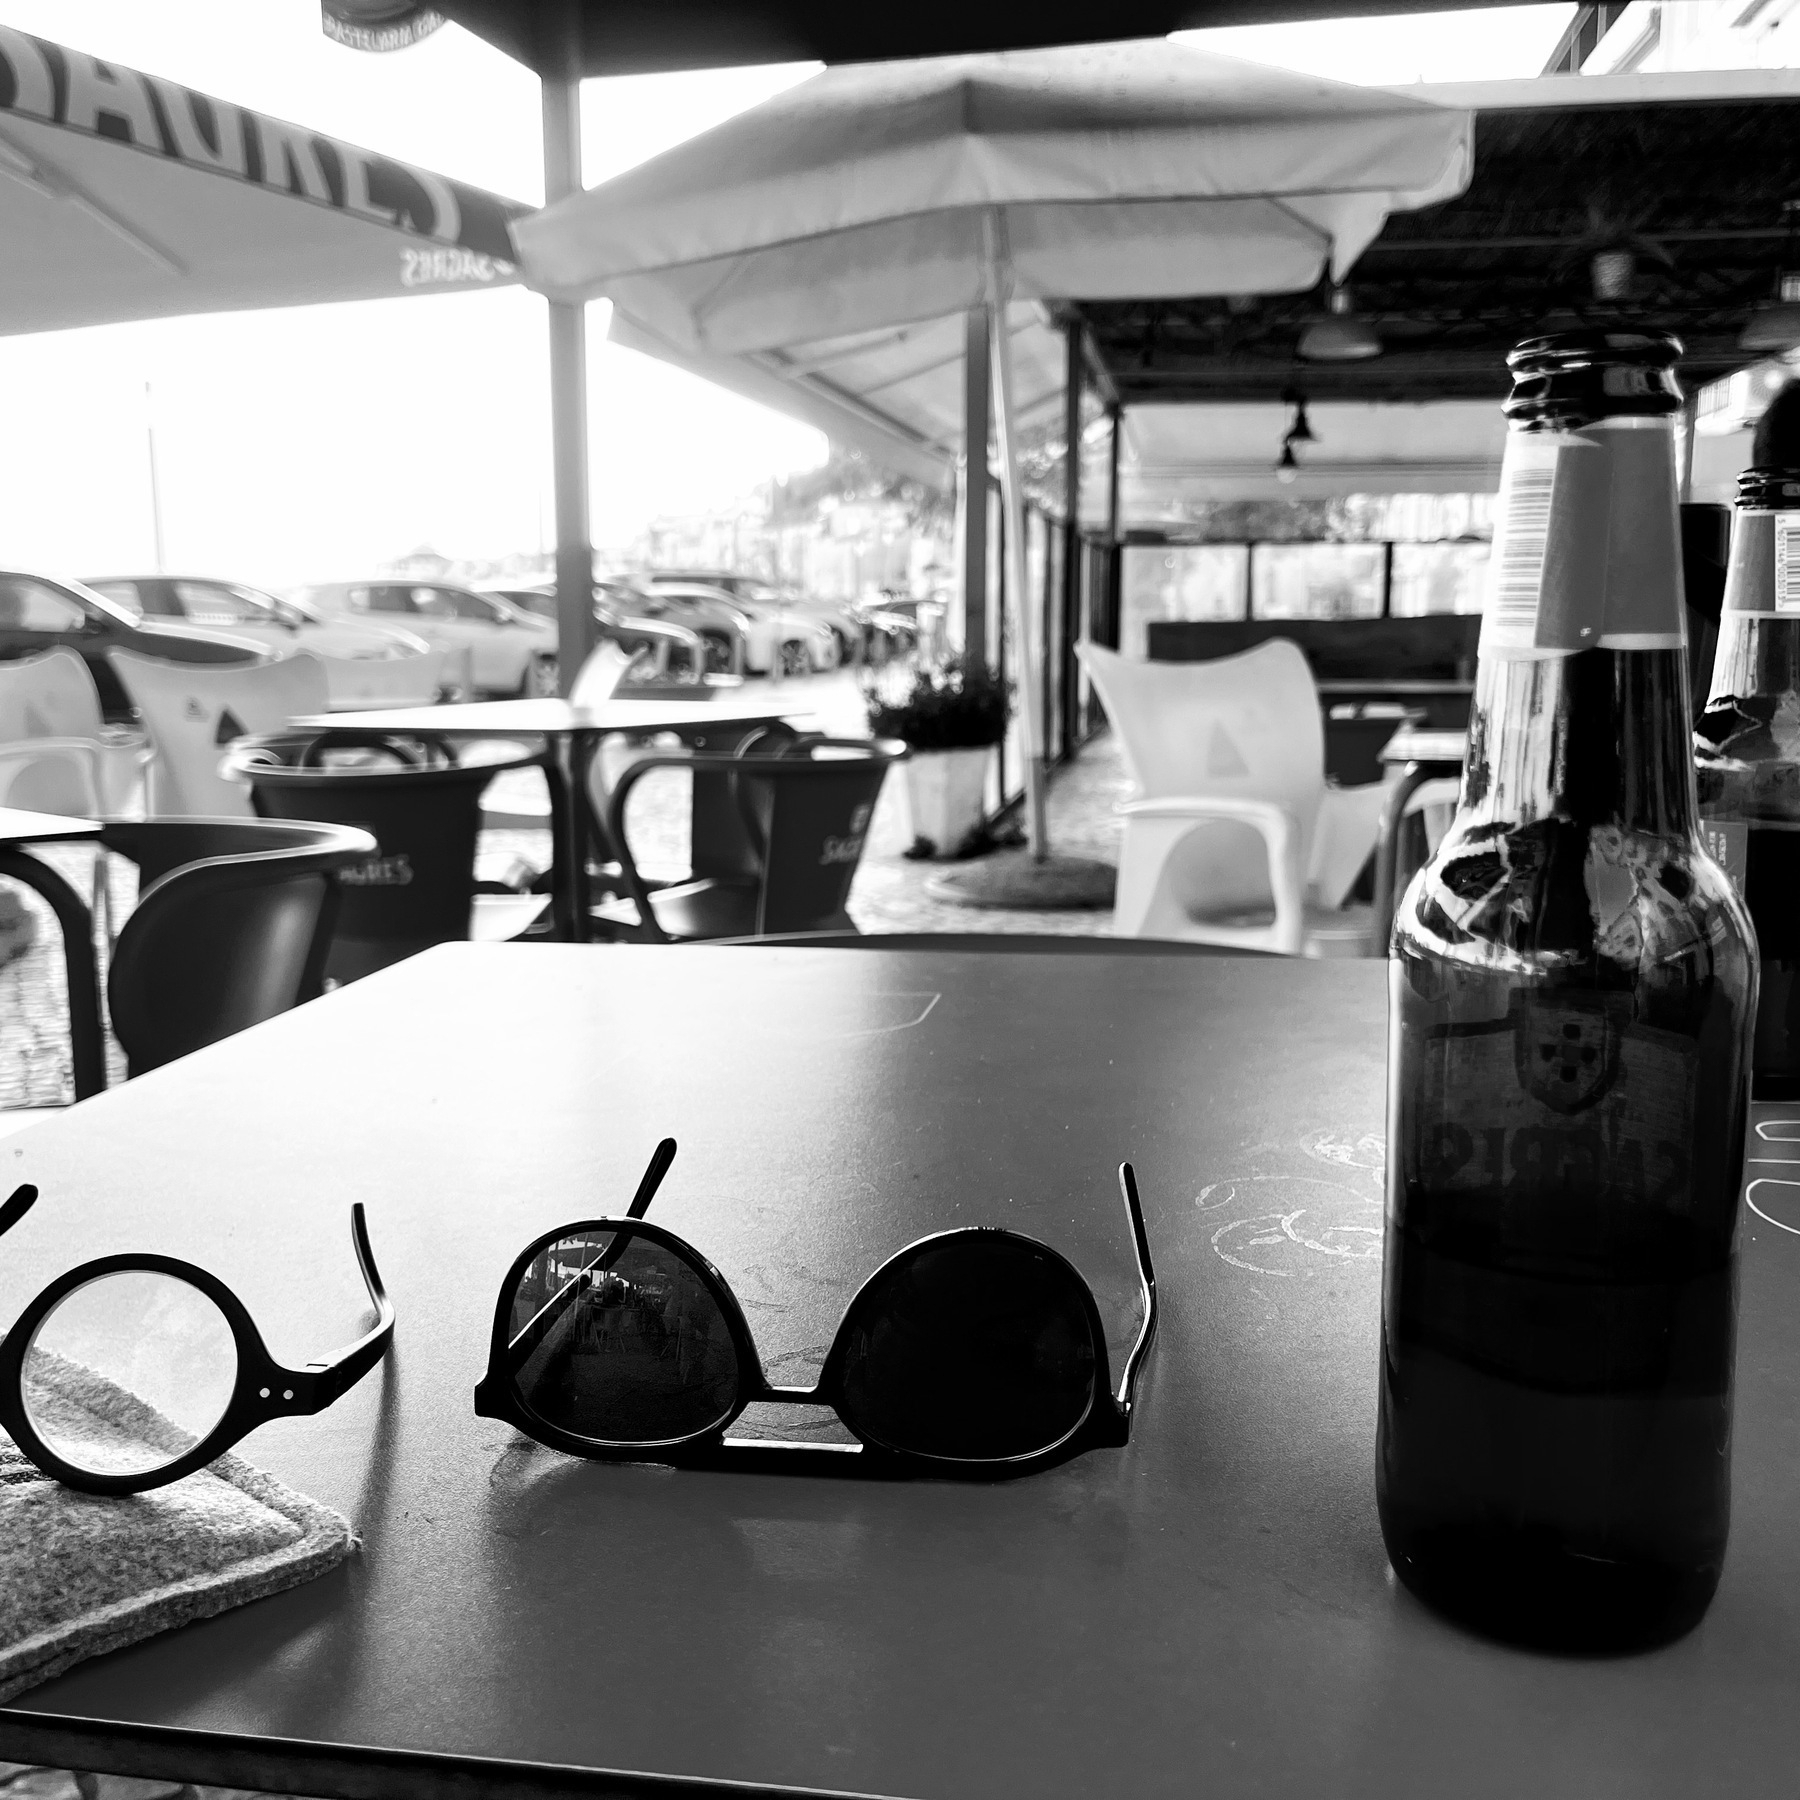 Black & white photo of a table with beer bottle, sunglasses and ordinary glasses on